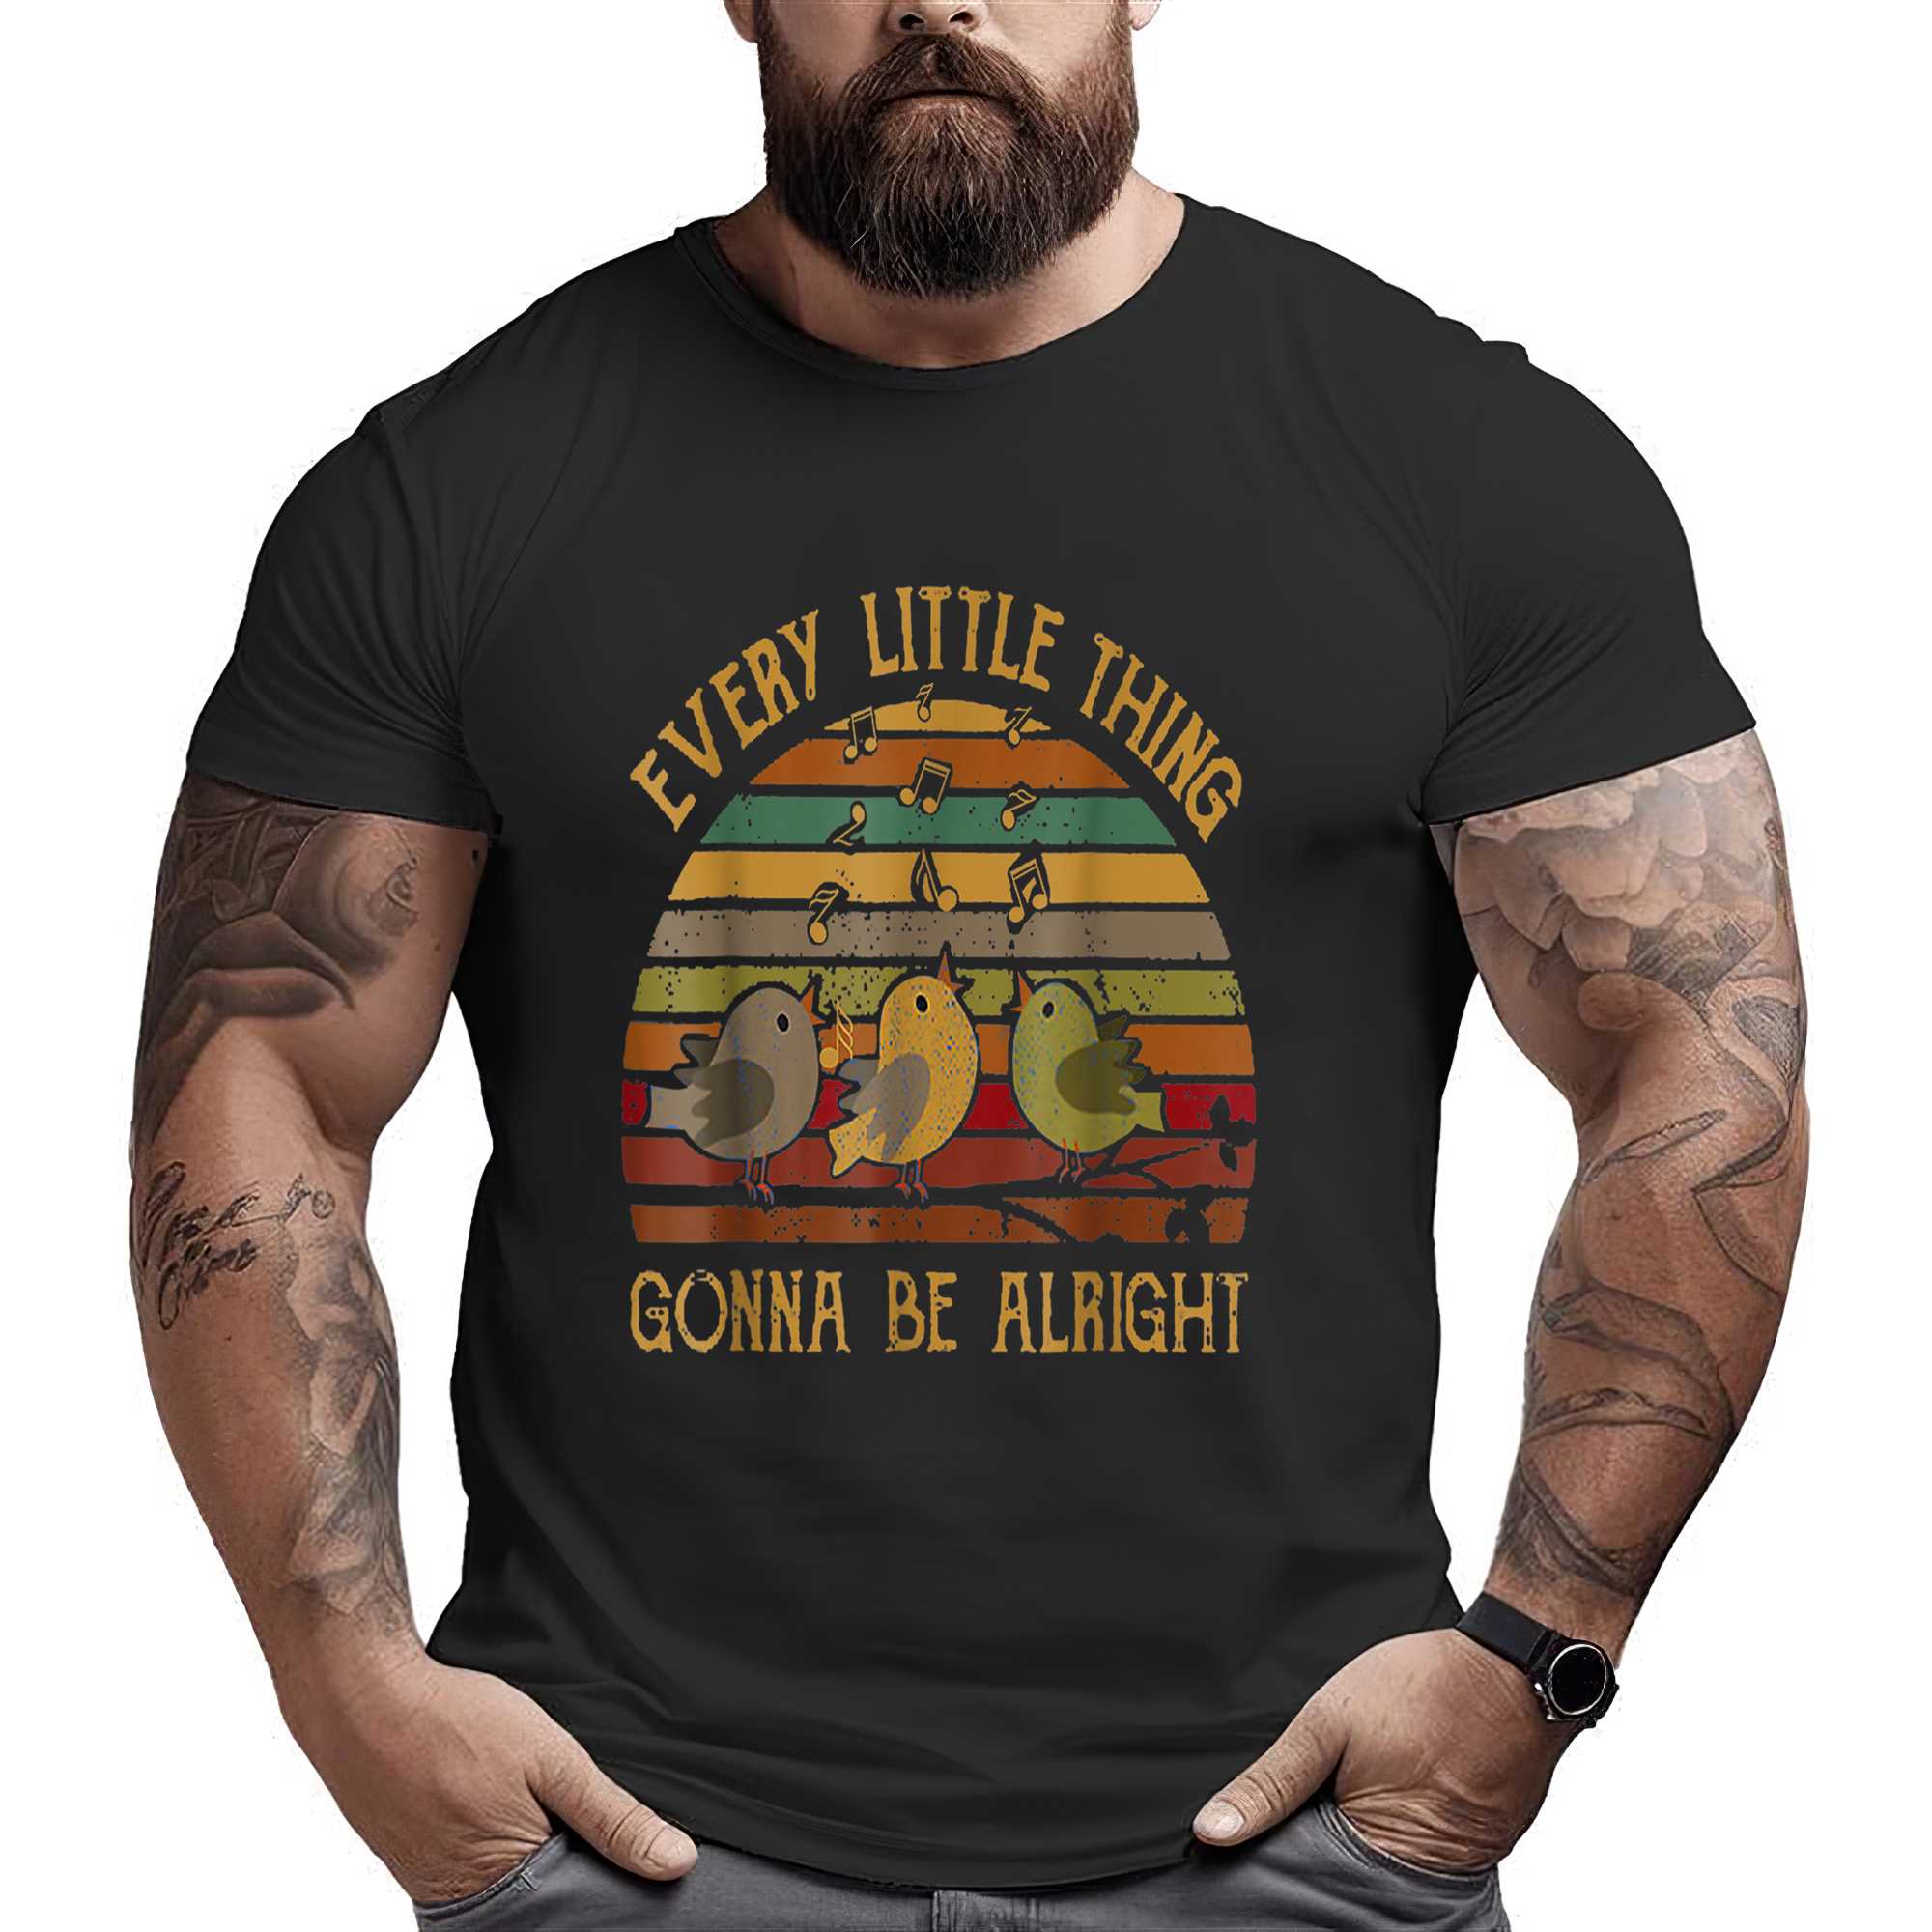 Every Vintage Little Singing Thing Is Gonna Be Birds Alright T-shirt